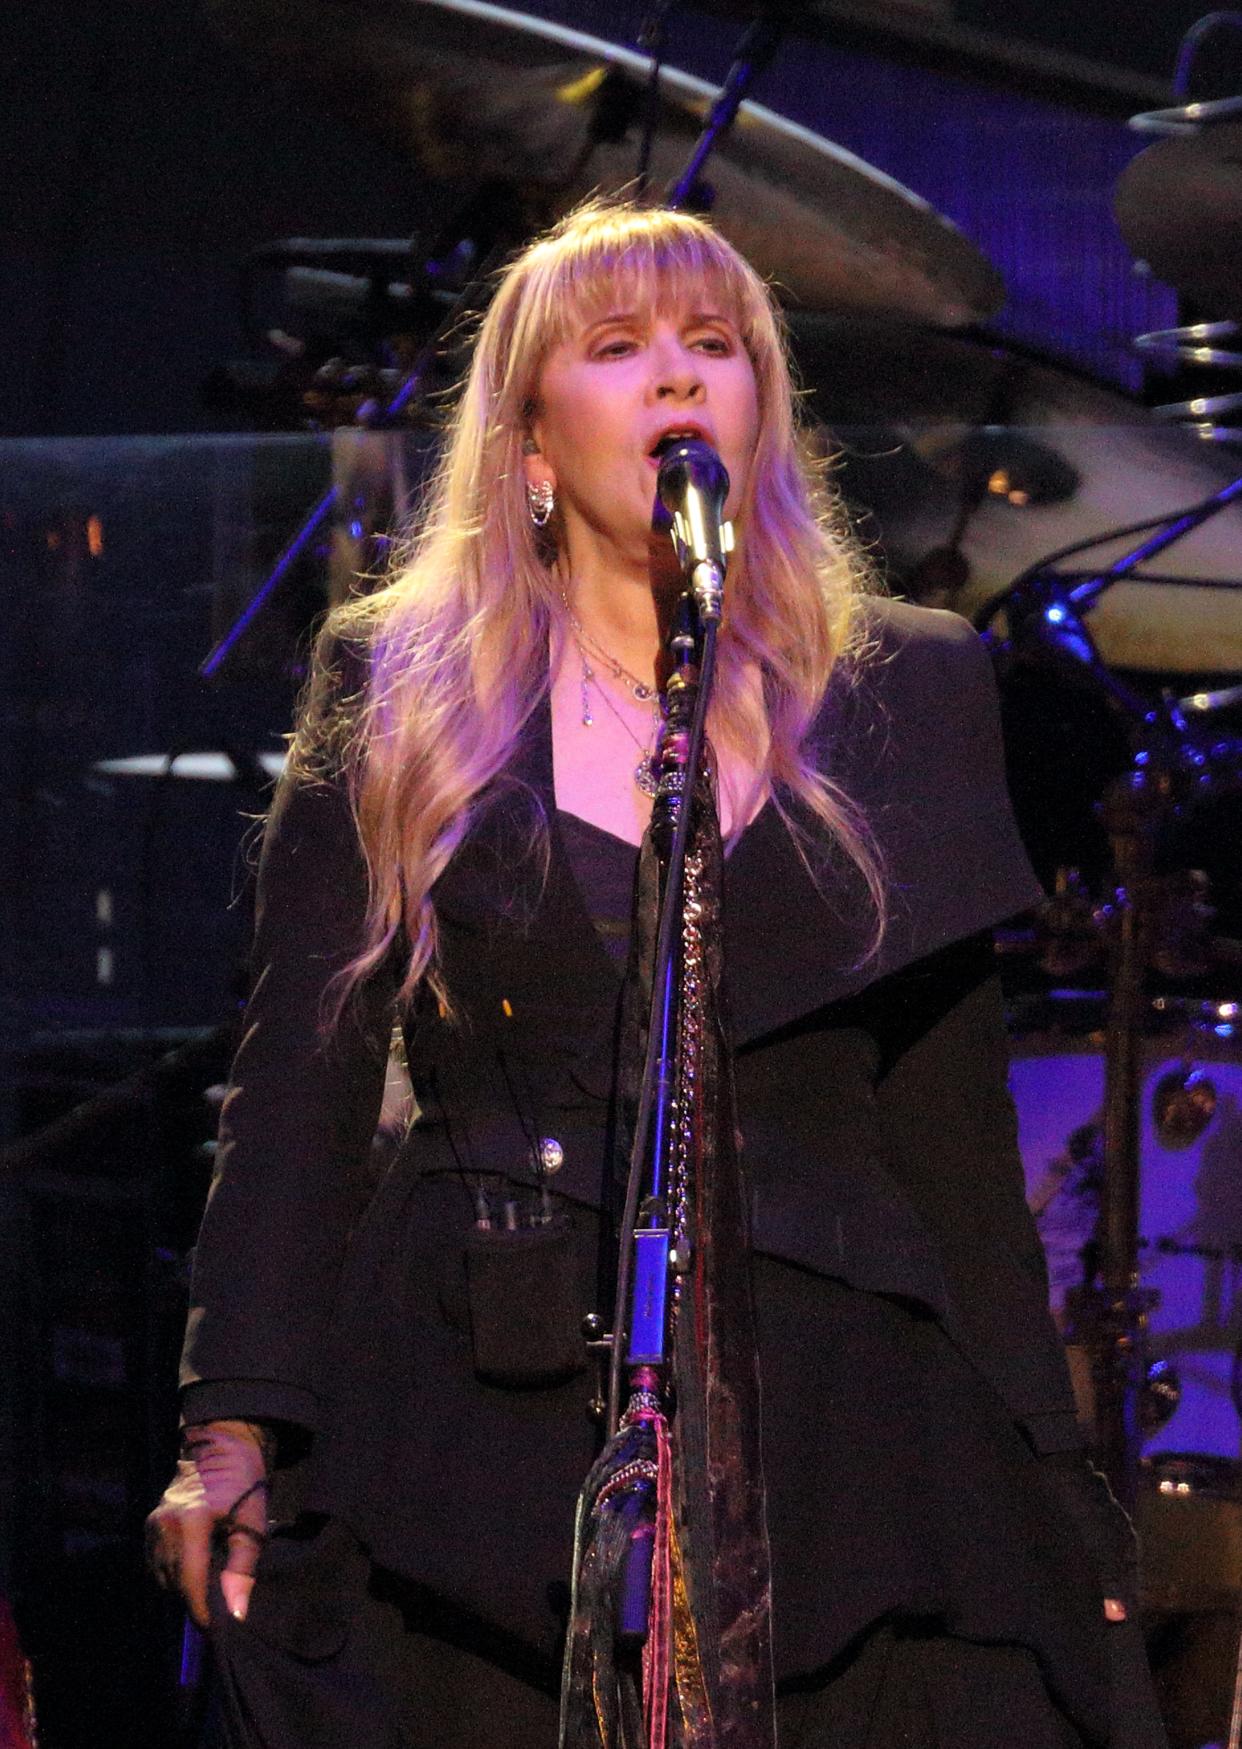 Stevie Nicks will return to Milwaukee's Fiserv Forum - this time, without Fleetwood Mac - for a concert Aug. 8.